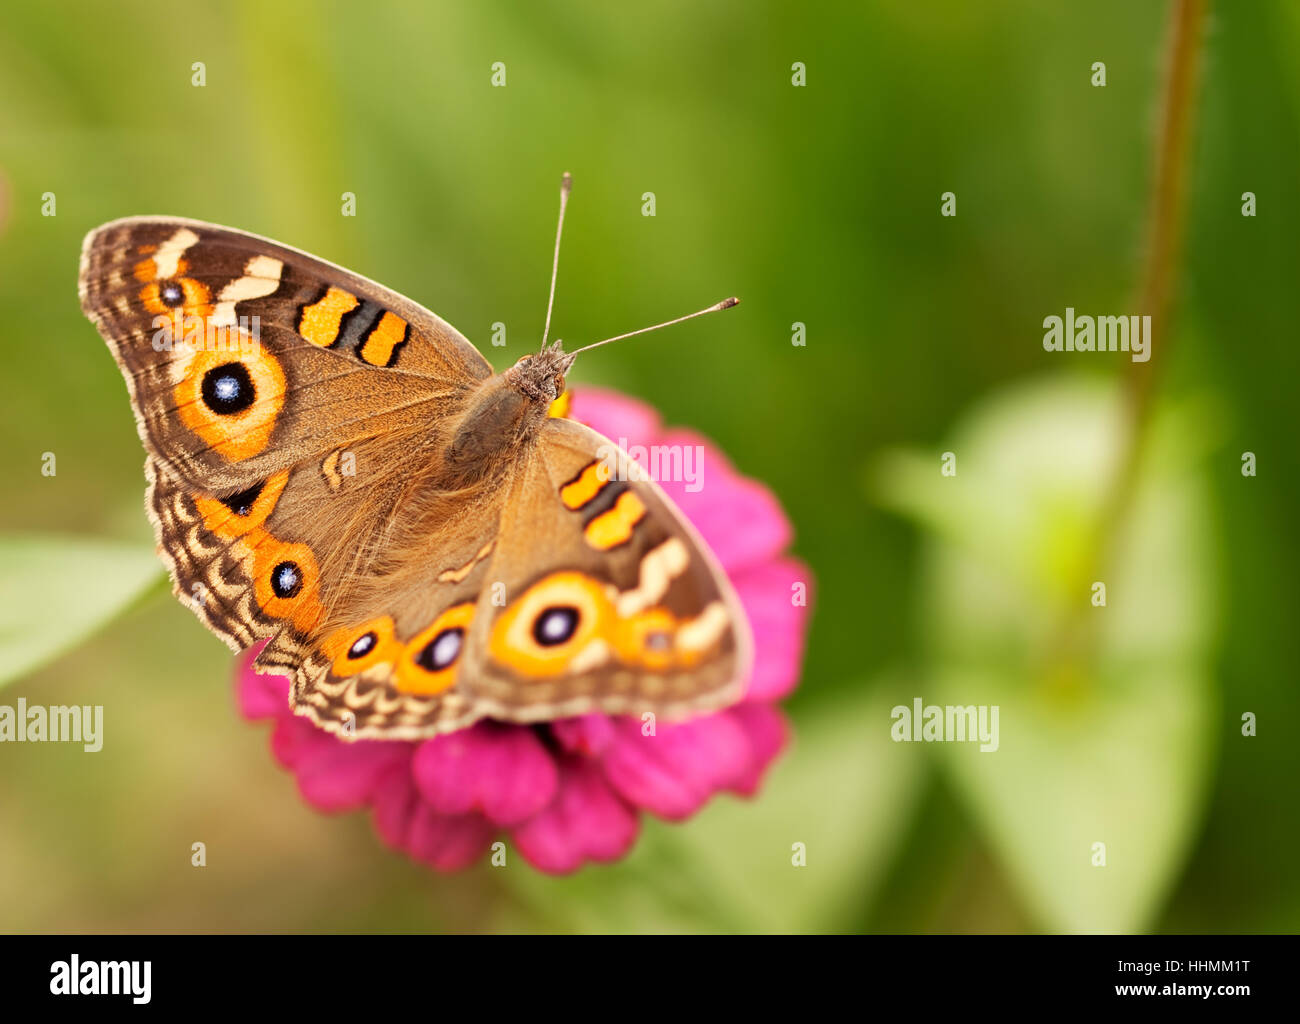 life, exist, existence, living, lives, live, insect, butterfly, australian, Stock Photo